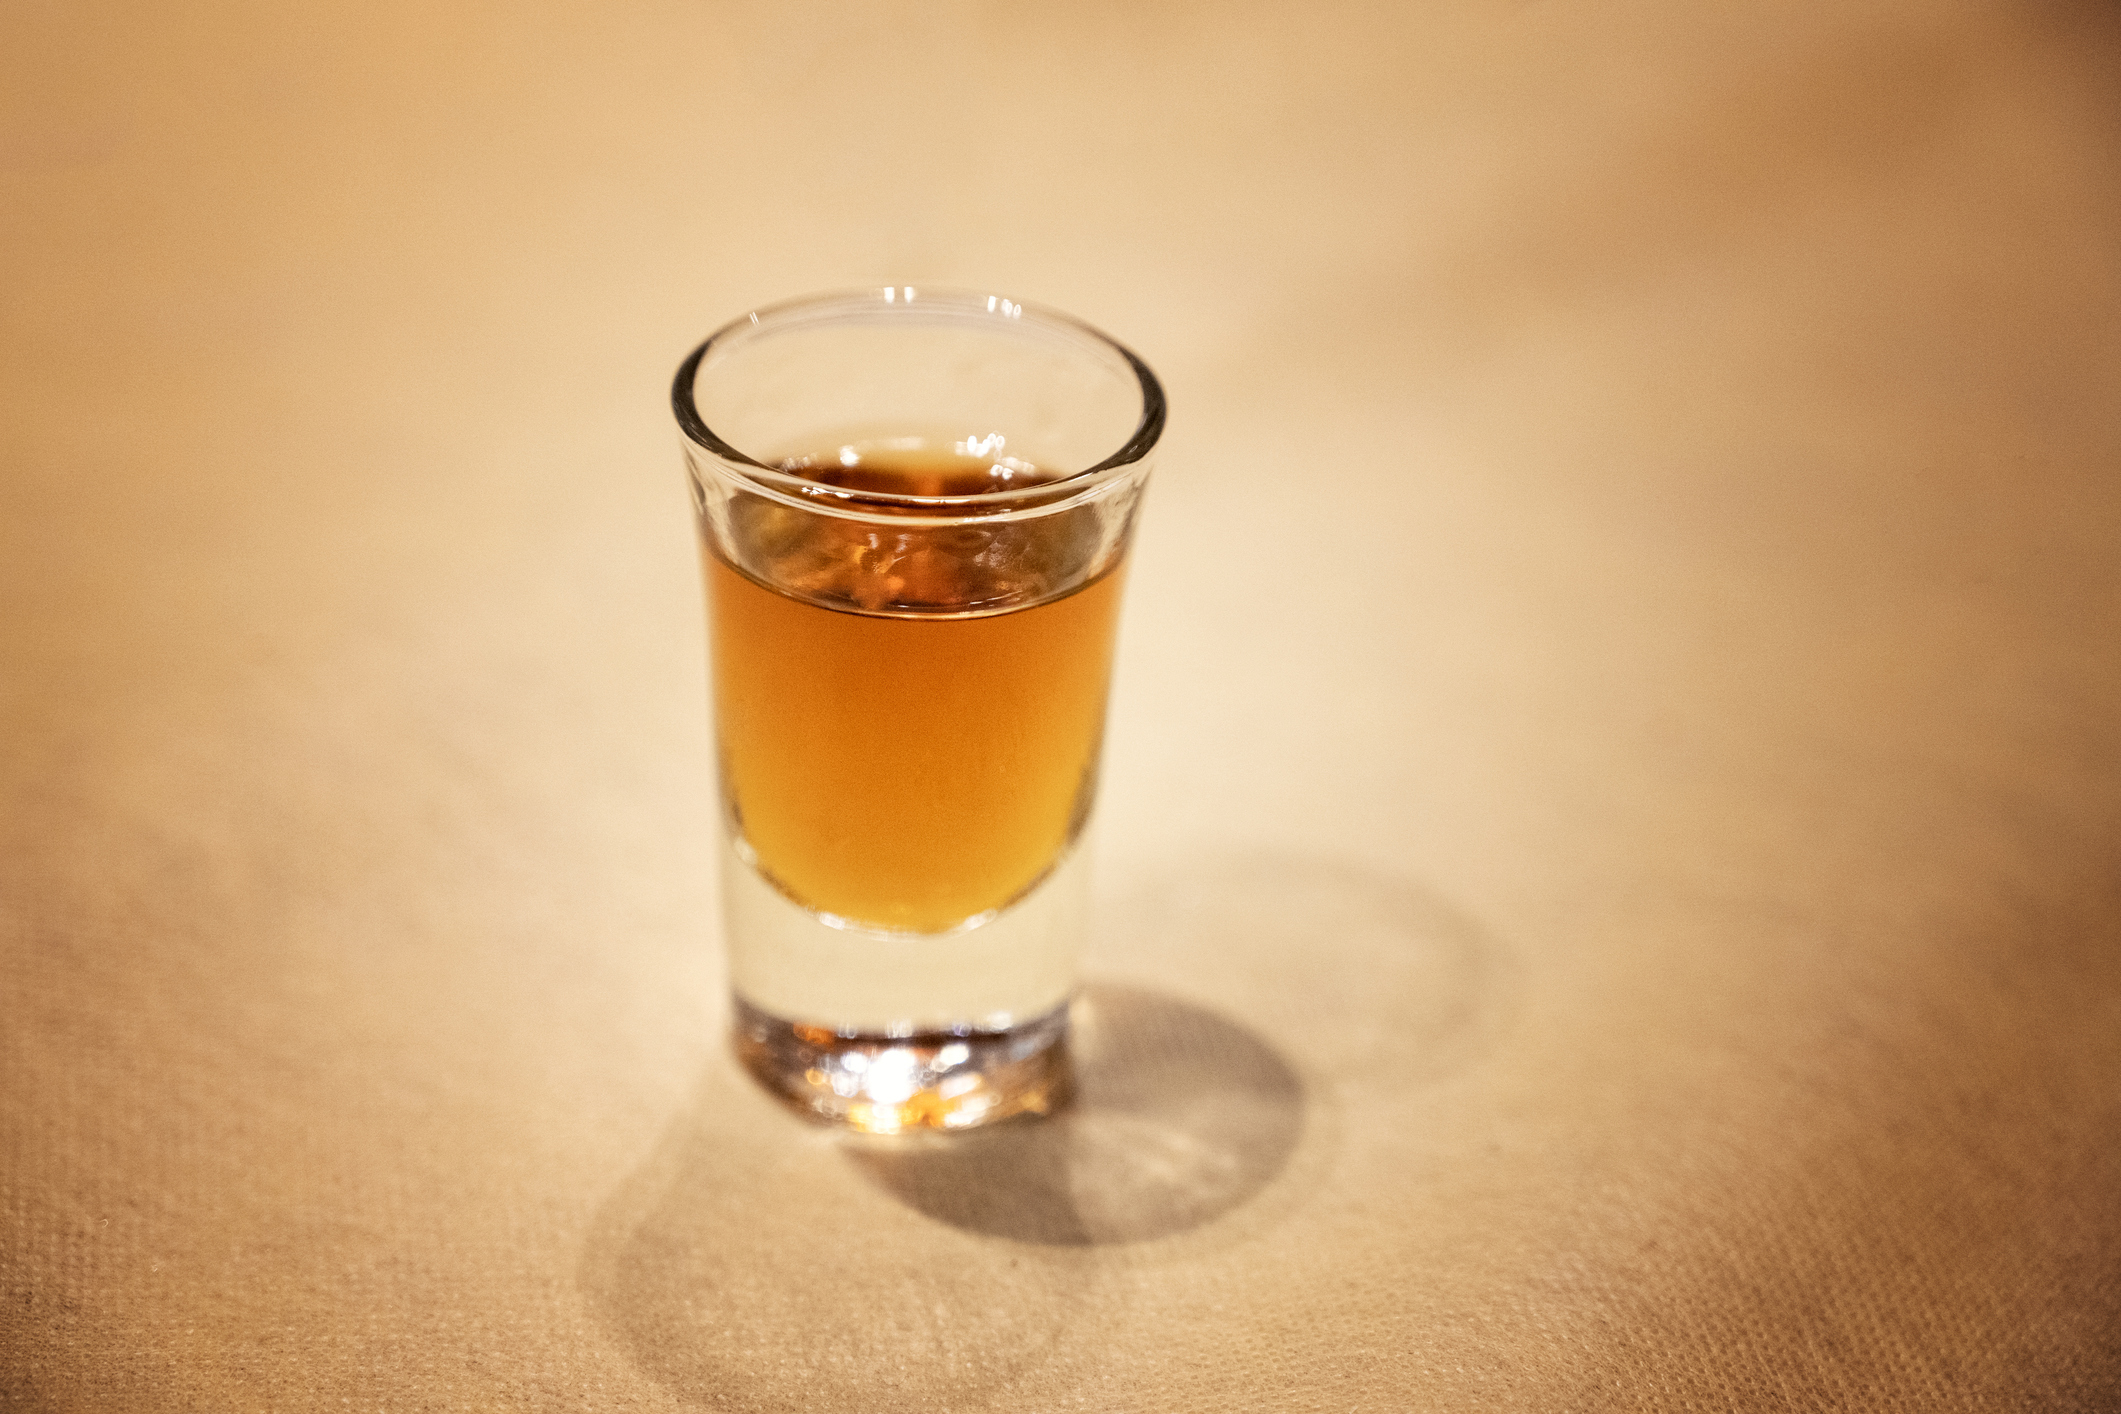 Shot glass filled with amber liquid on a textured surface